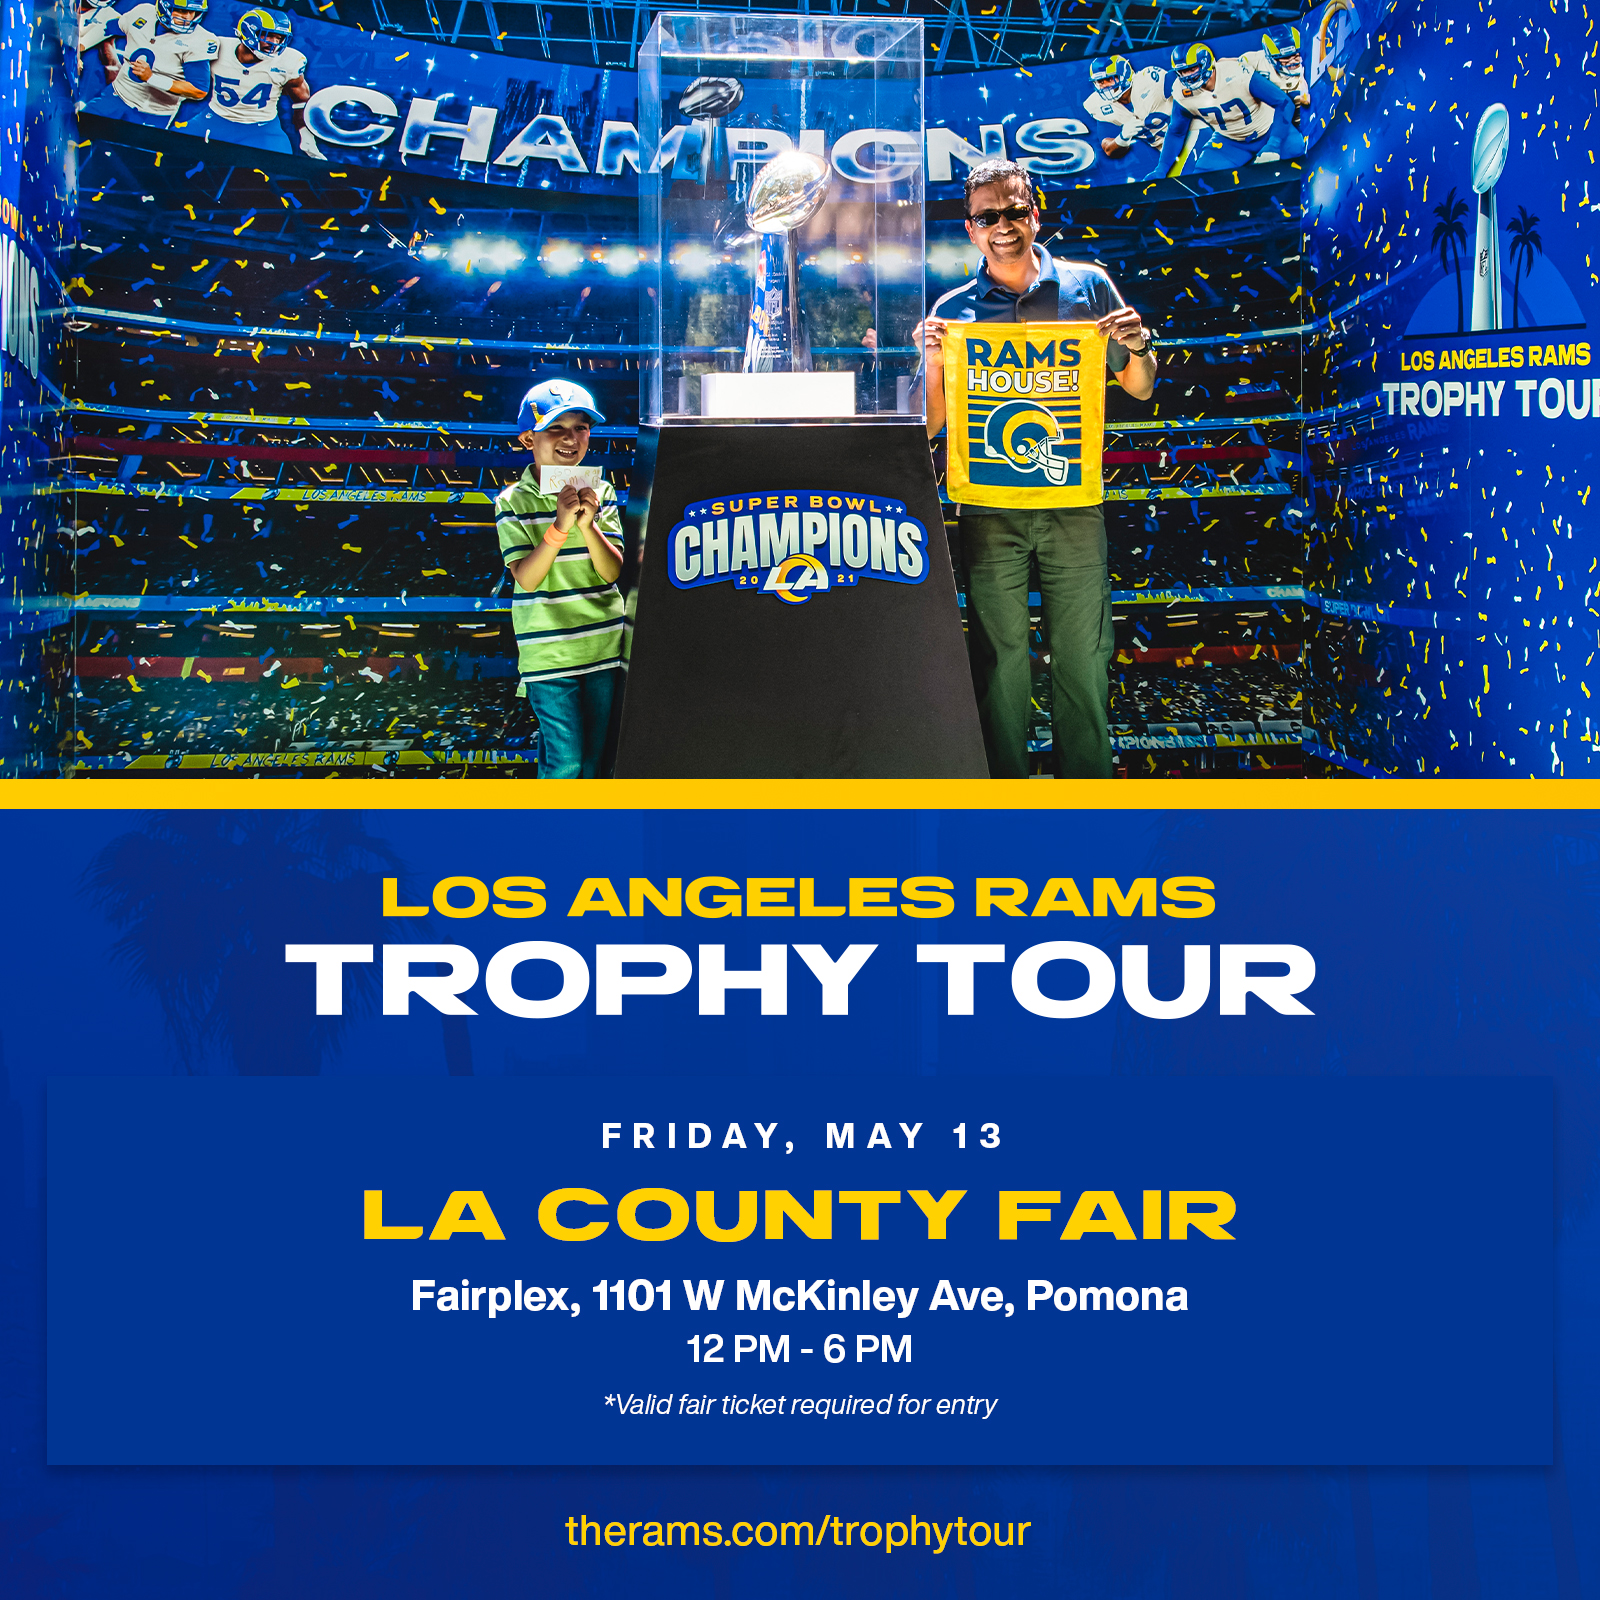 Los Angeles Rams on X: 'You have three opportunities to join us for the  Trophy Tour this weekend! 